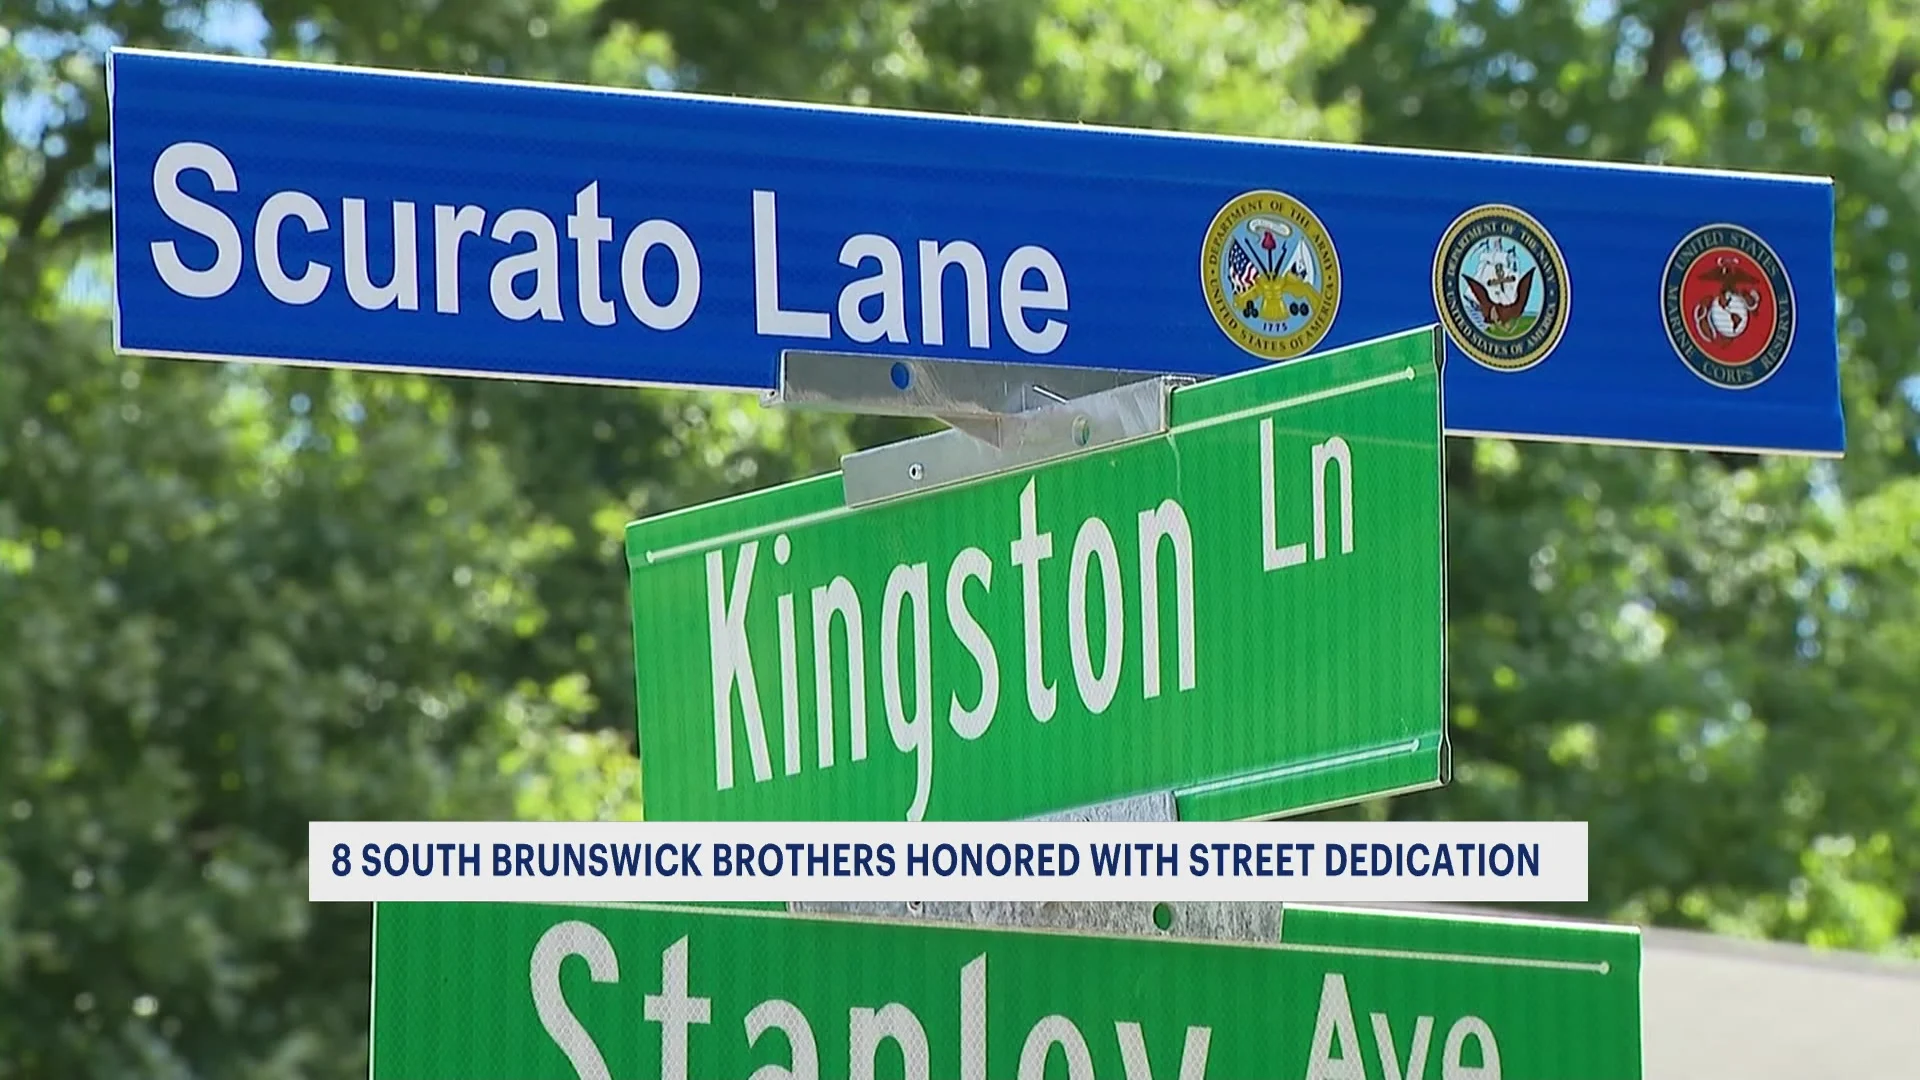 South Brunswick brothers who served in WWII and Korean war honored with street dedication